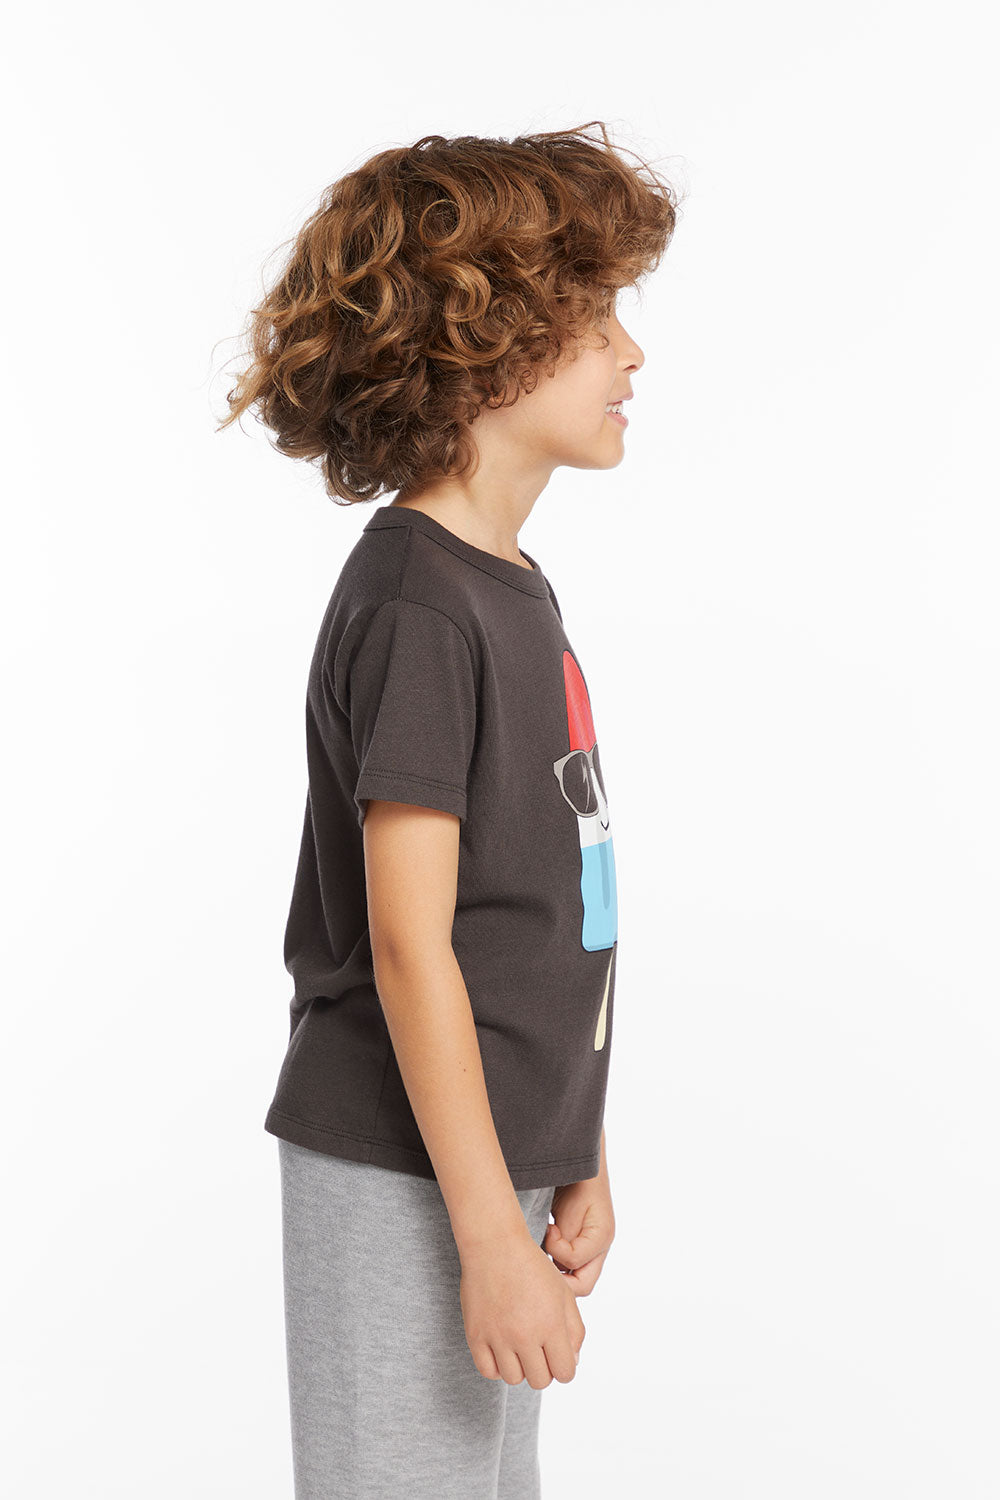 Chill Popsicle Boys Tee BOYS chaserbrand